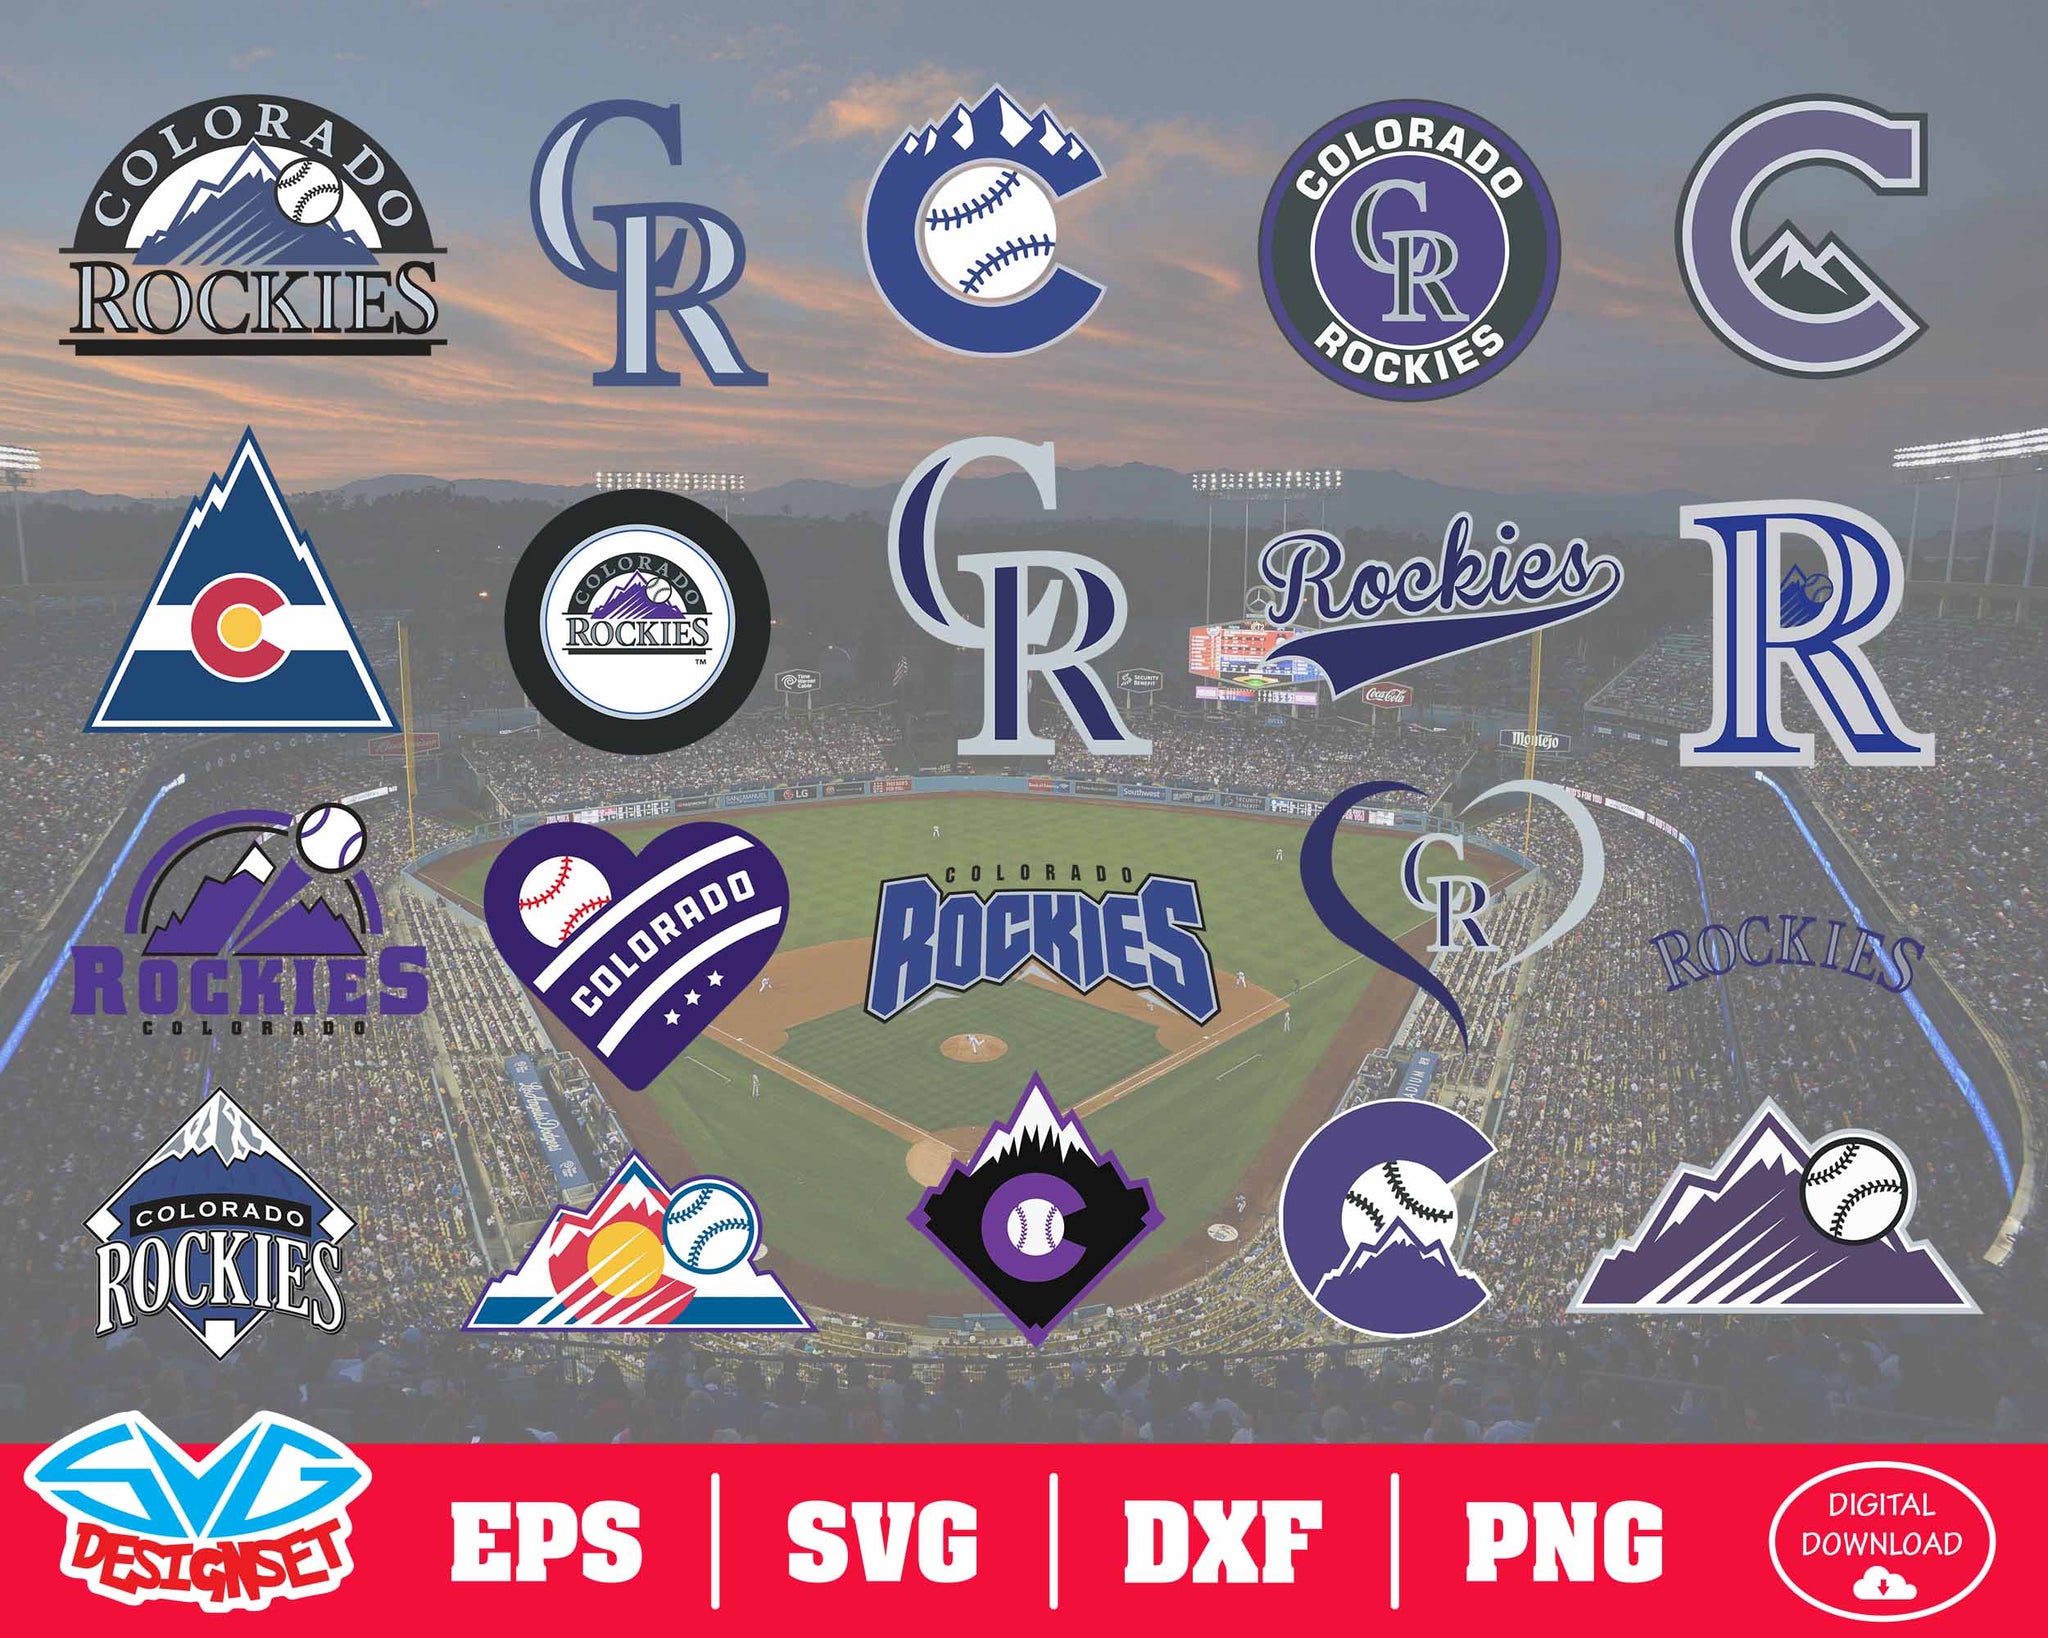 Colorado Rockies Team Svg, Dxf, Eps, Png, Clipart, Silhouette and Cutfiles - SVGDesignSets